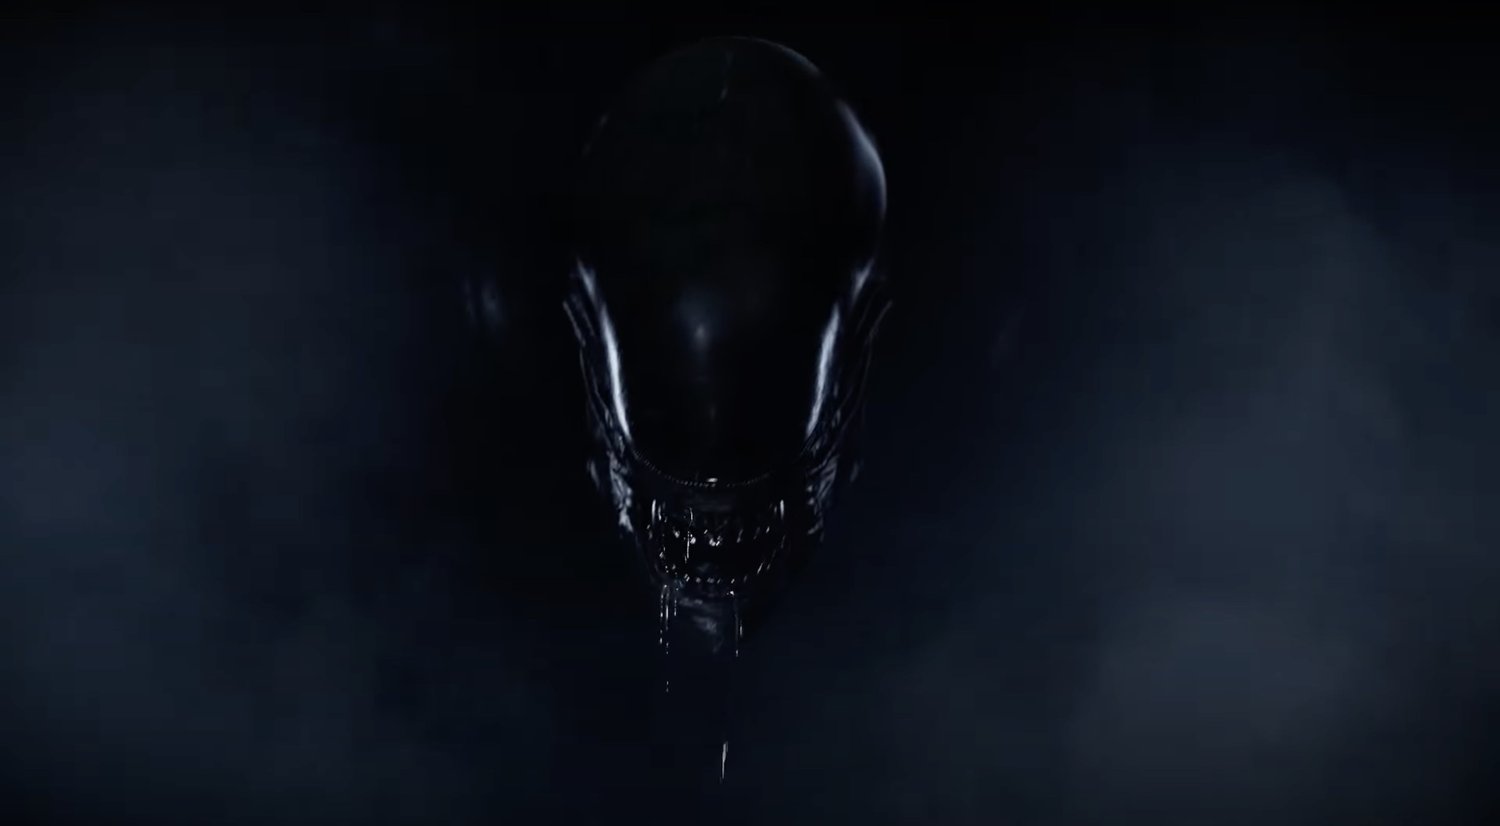 DEAD BY DAYLIGHT Announces Its Upcoming ALIEN Crossover with Teaser Trailer
      
    @media(min-width:0px){#div-gpt-ad-geektyrant_com-box-3-0-asloaded{max-width:728px;width:728px!important;max-height:90px;height:90px!important;}}